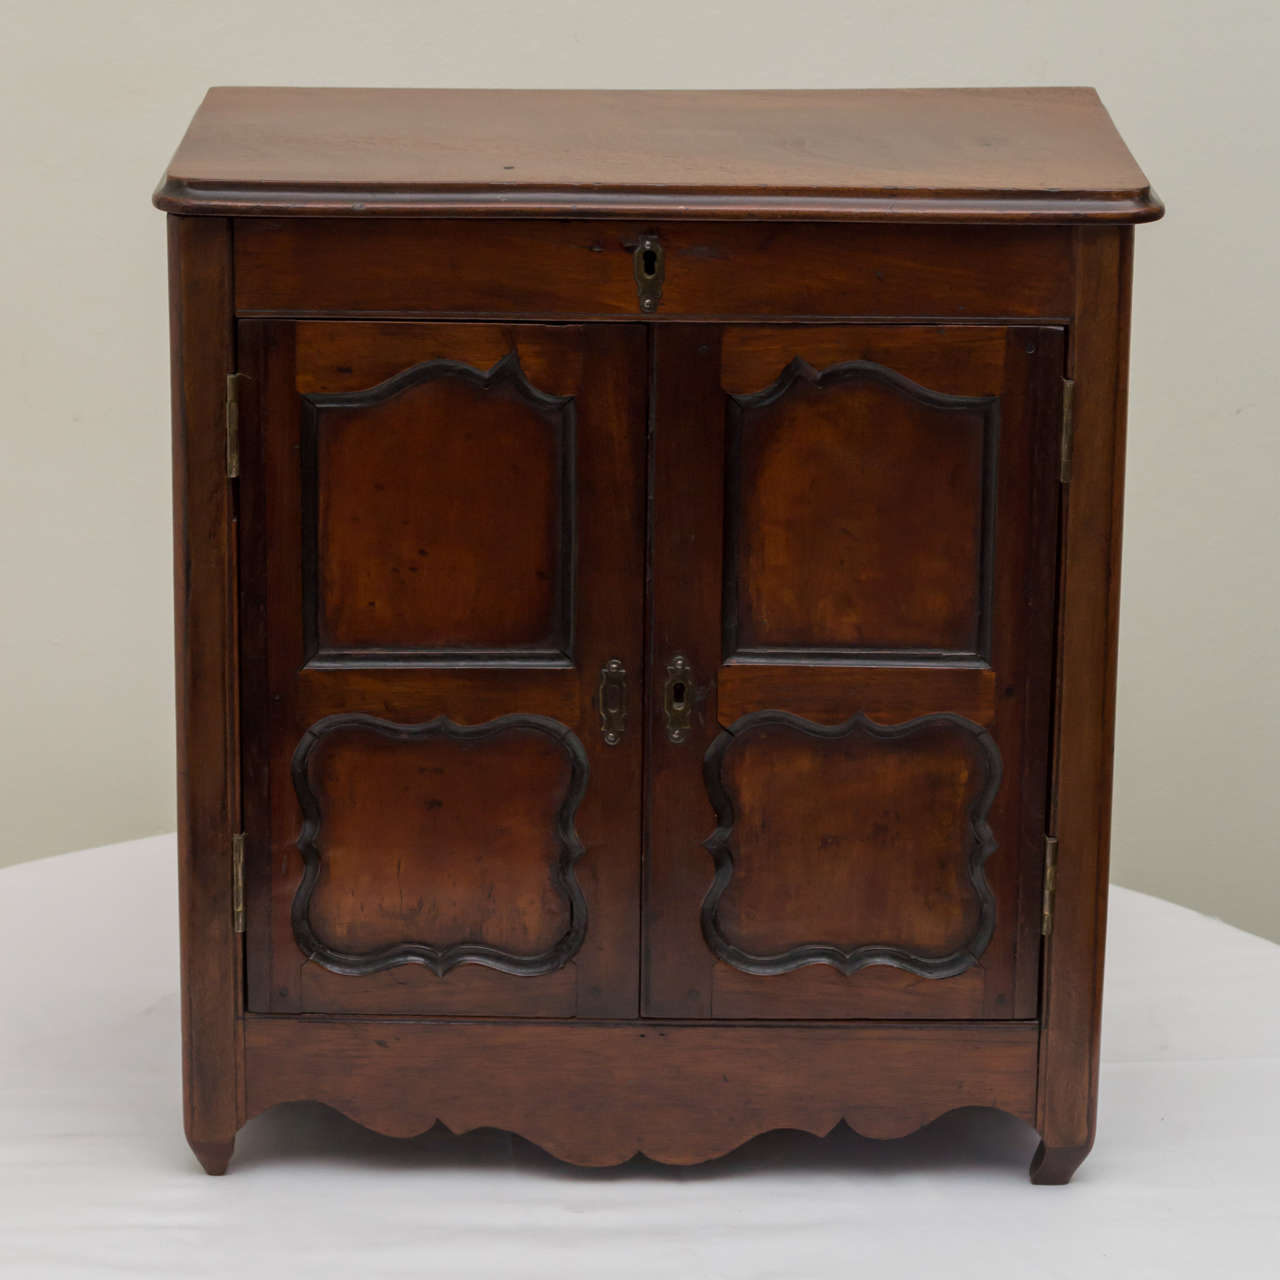 Late 18th century French miniature walnut armoire. Top compartment and fitted with three drawers below. Brass hardware. Perfect as a jewelry box. Very good detailed construction and dovetail drawers.